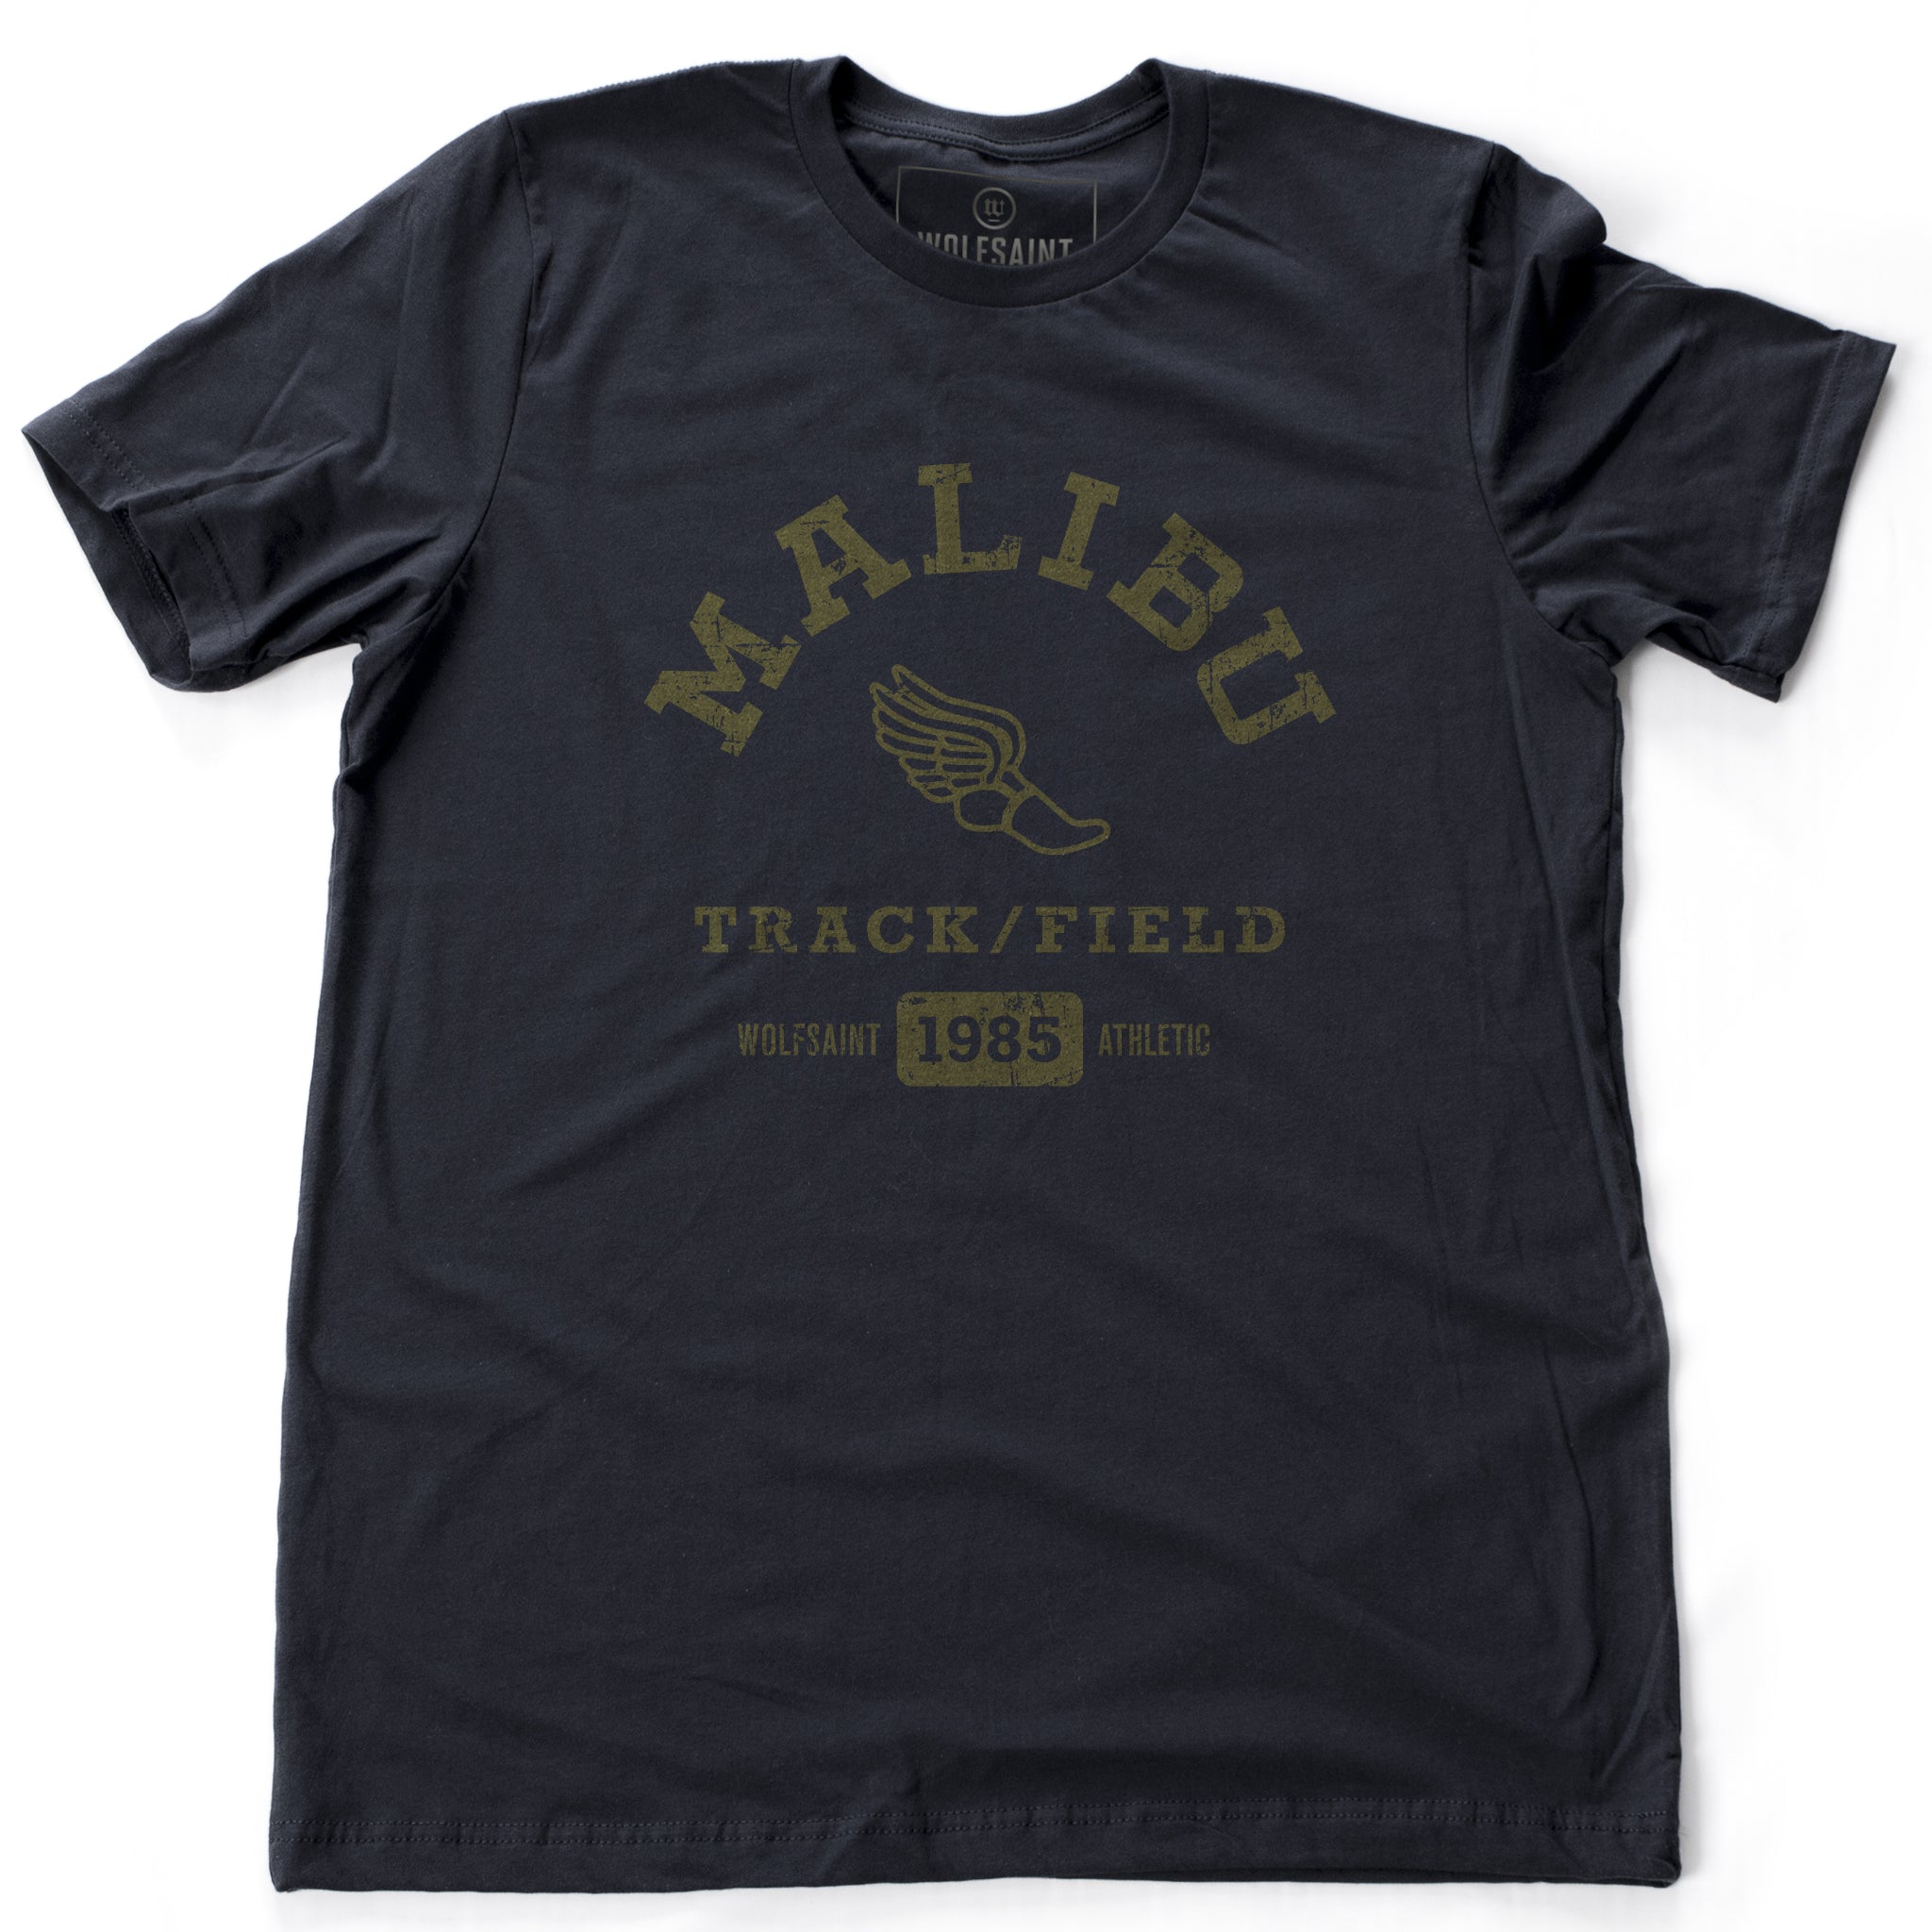 A fashionable, vintage-inspired retro t-shirt in Classic Navy Blue, featuring a graphic representing a sarcastic and fictitious Malibu (California) Track and Field team. From wolfsaint.net